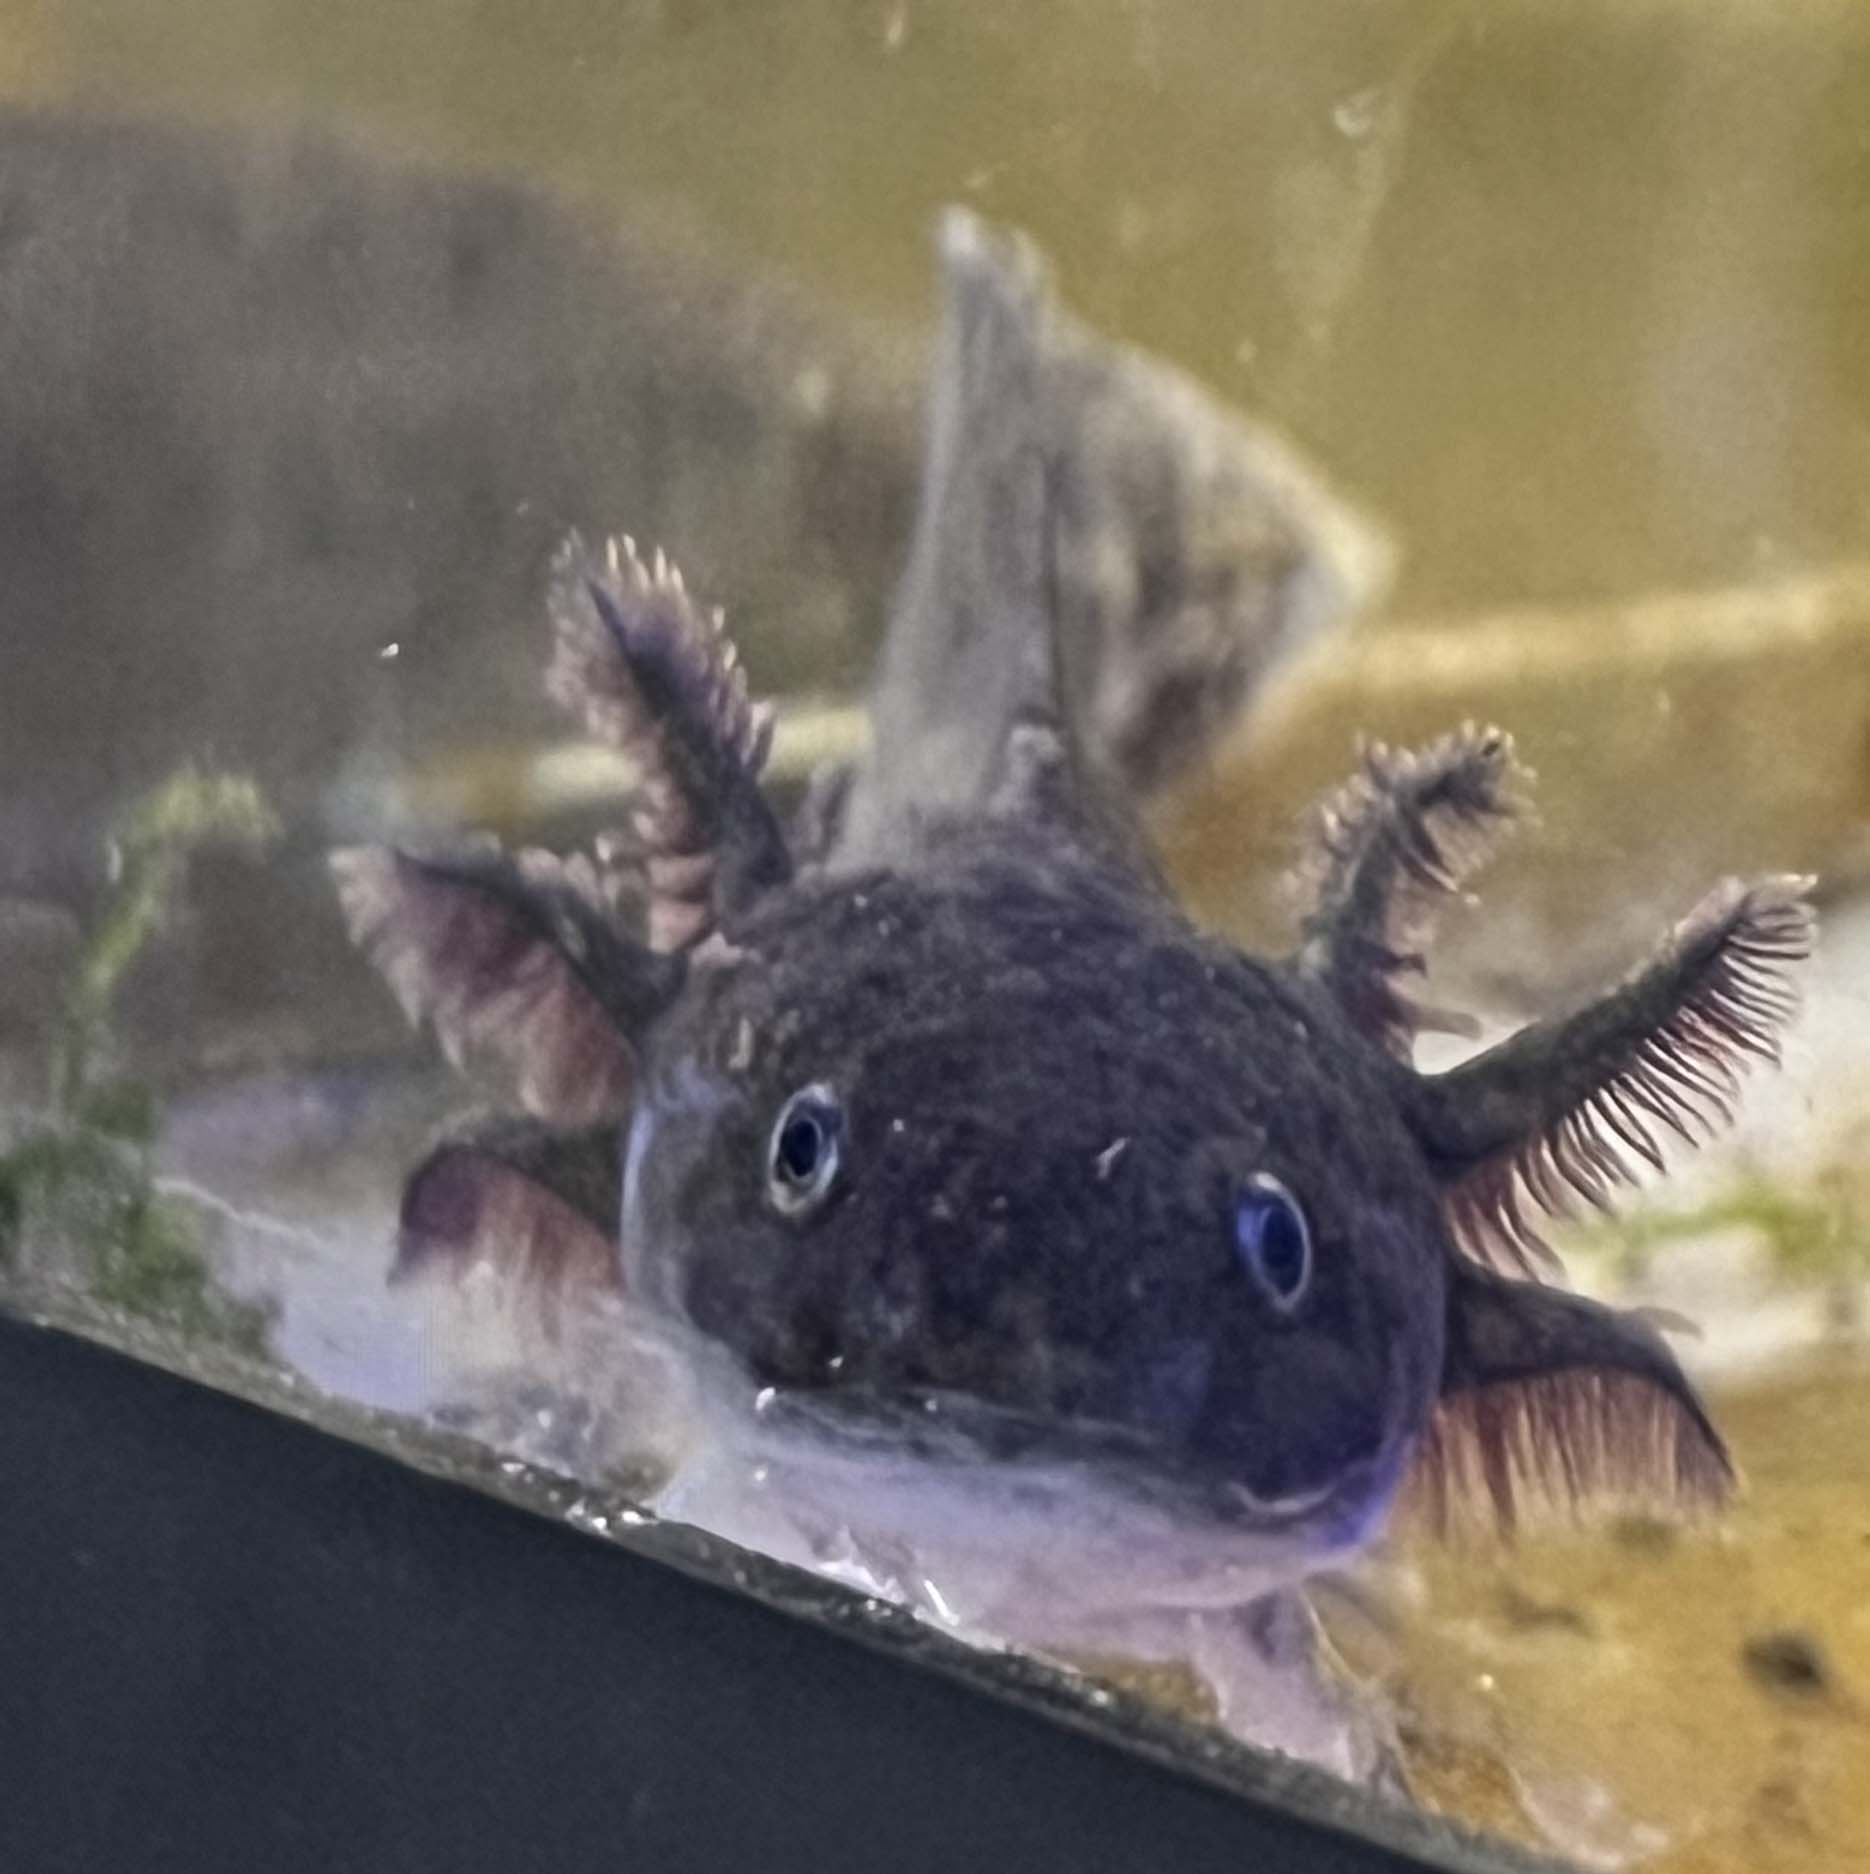 The Mesmerizing Axolotl: A Guide to Their Care, Feeding, and Maintenance